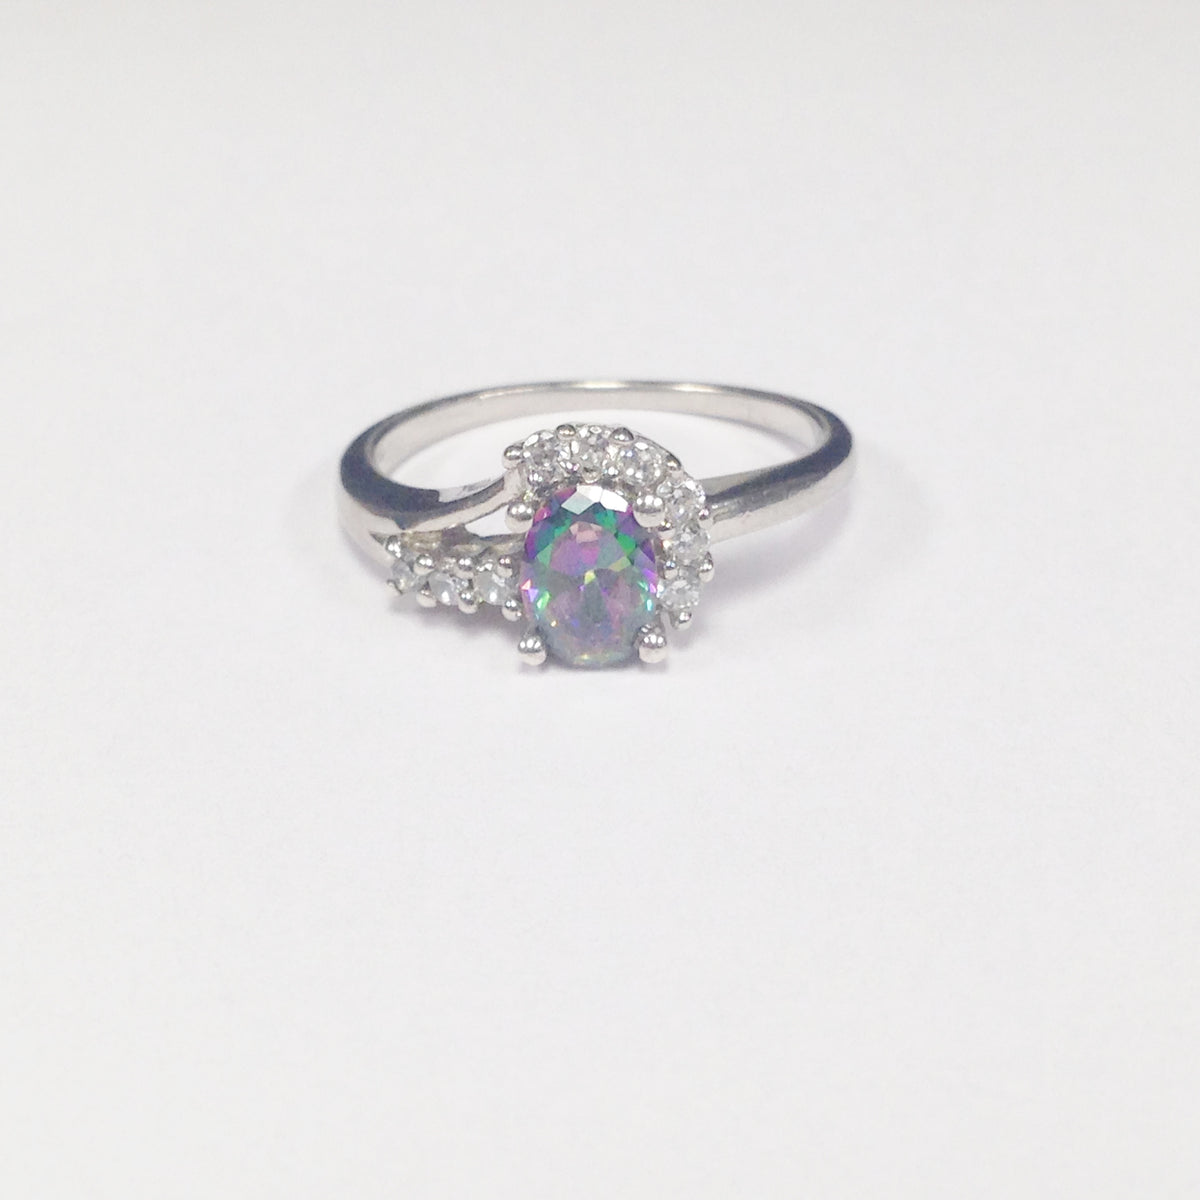 CZ Mystic Topaz .925 Sterling Silver Ring www.hersandhistreasures.com/collections/sterling-silver-jewelry